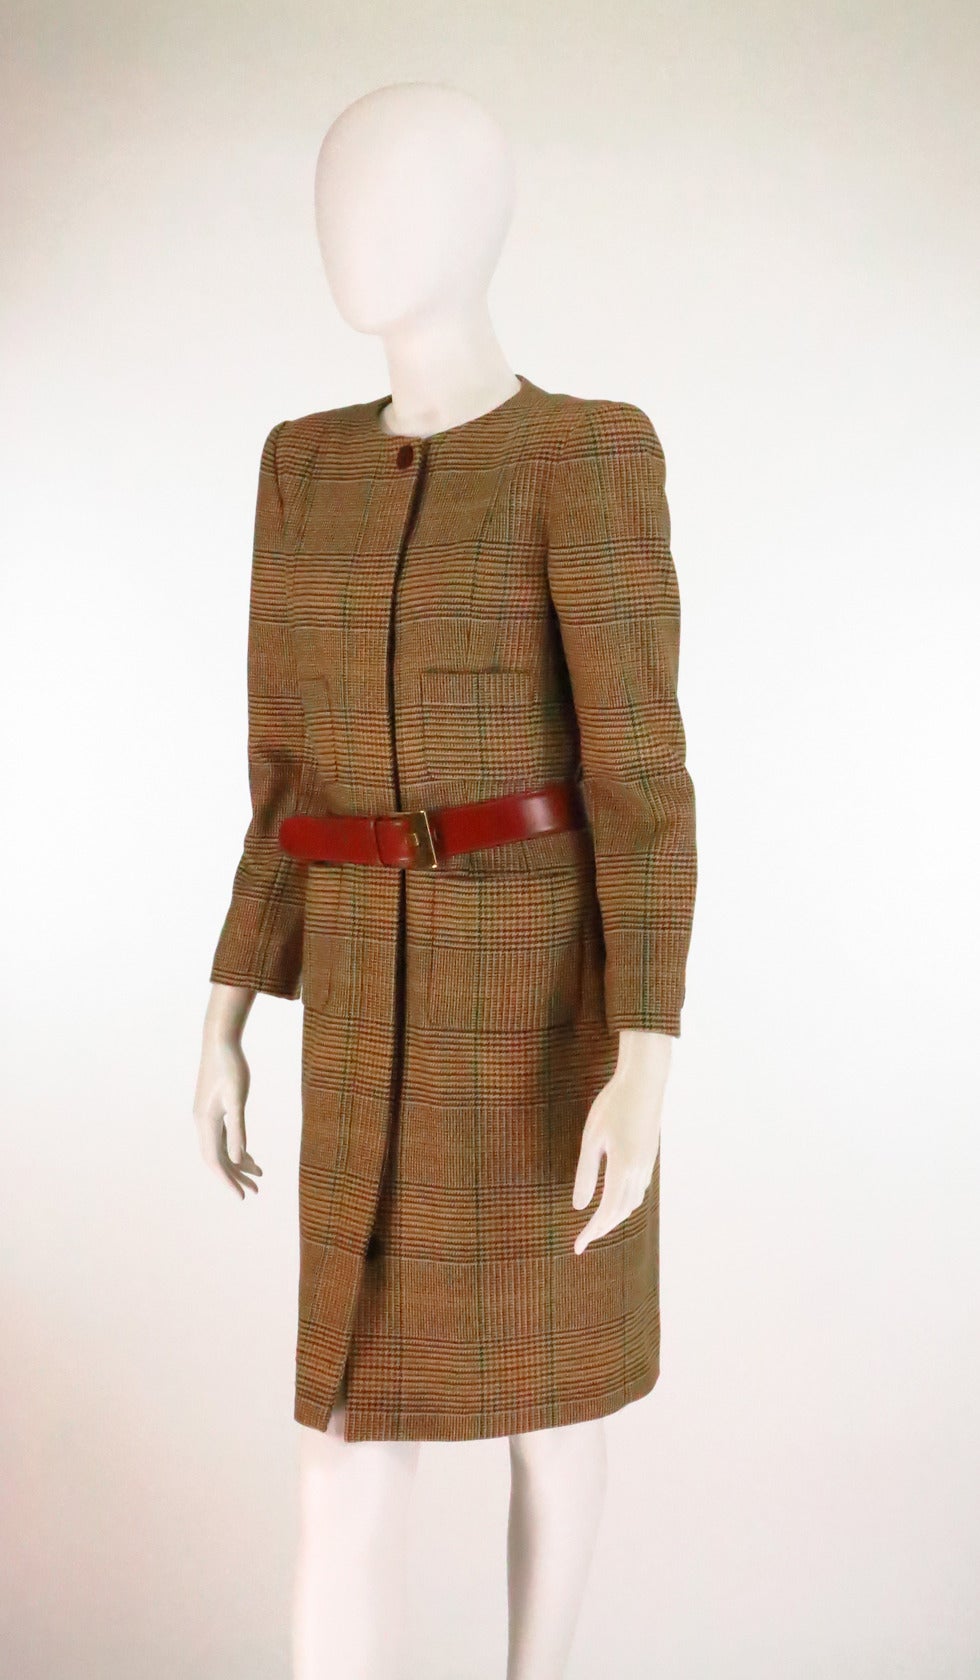 Oscar de la Renta wool plaid 4 pocket coat dress...Round neck, long sleeve dress is fully lined, closes at the front with hidden placket and leather buttons, there are hidden snaps...Long sleeves with a single leather button at each cuff...4 patch